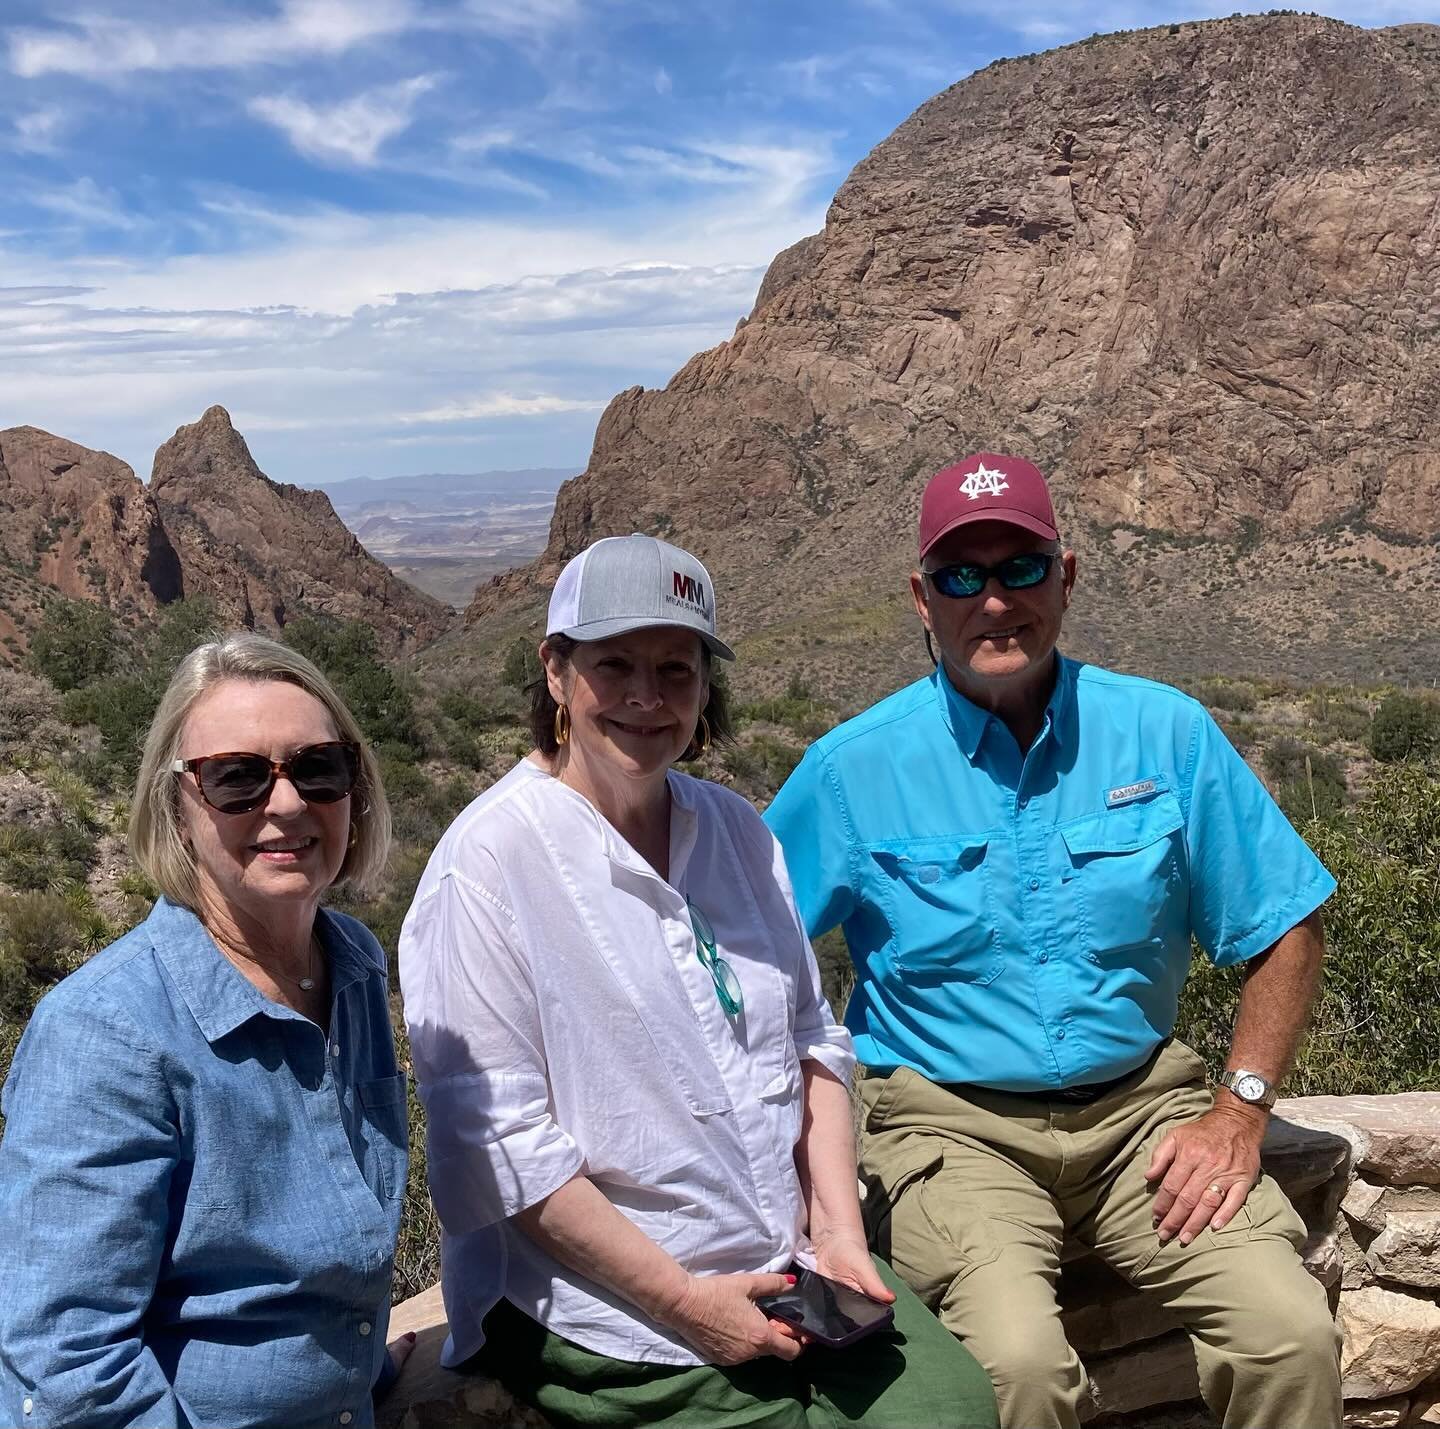 A fun weekend trip to Big Bend with Tad and the crew!  The view was great but the people were even better!🏜️🌅 
 
#GalmRealEstate #BigBend #NationalPark #WeekendTrip